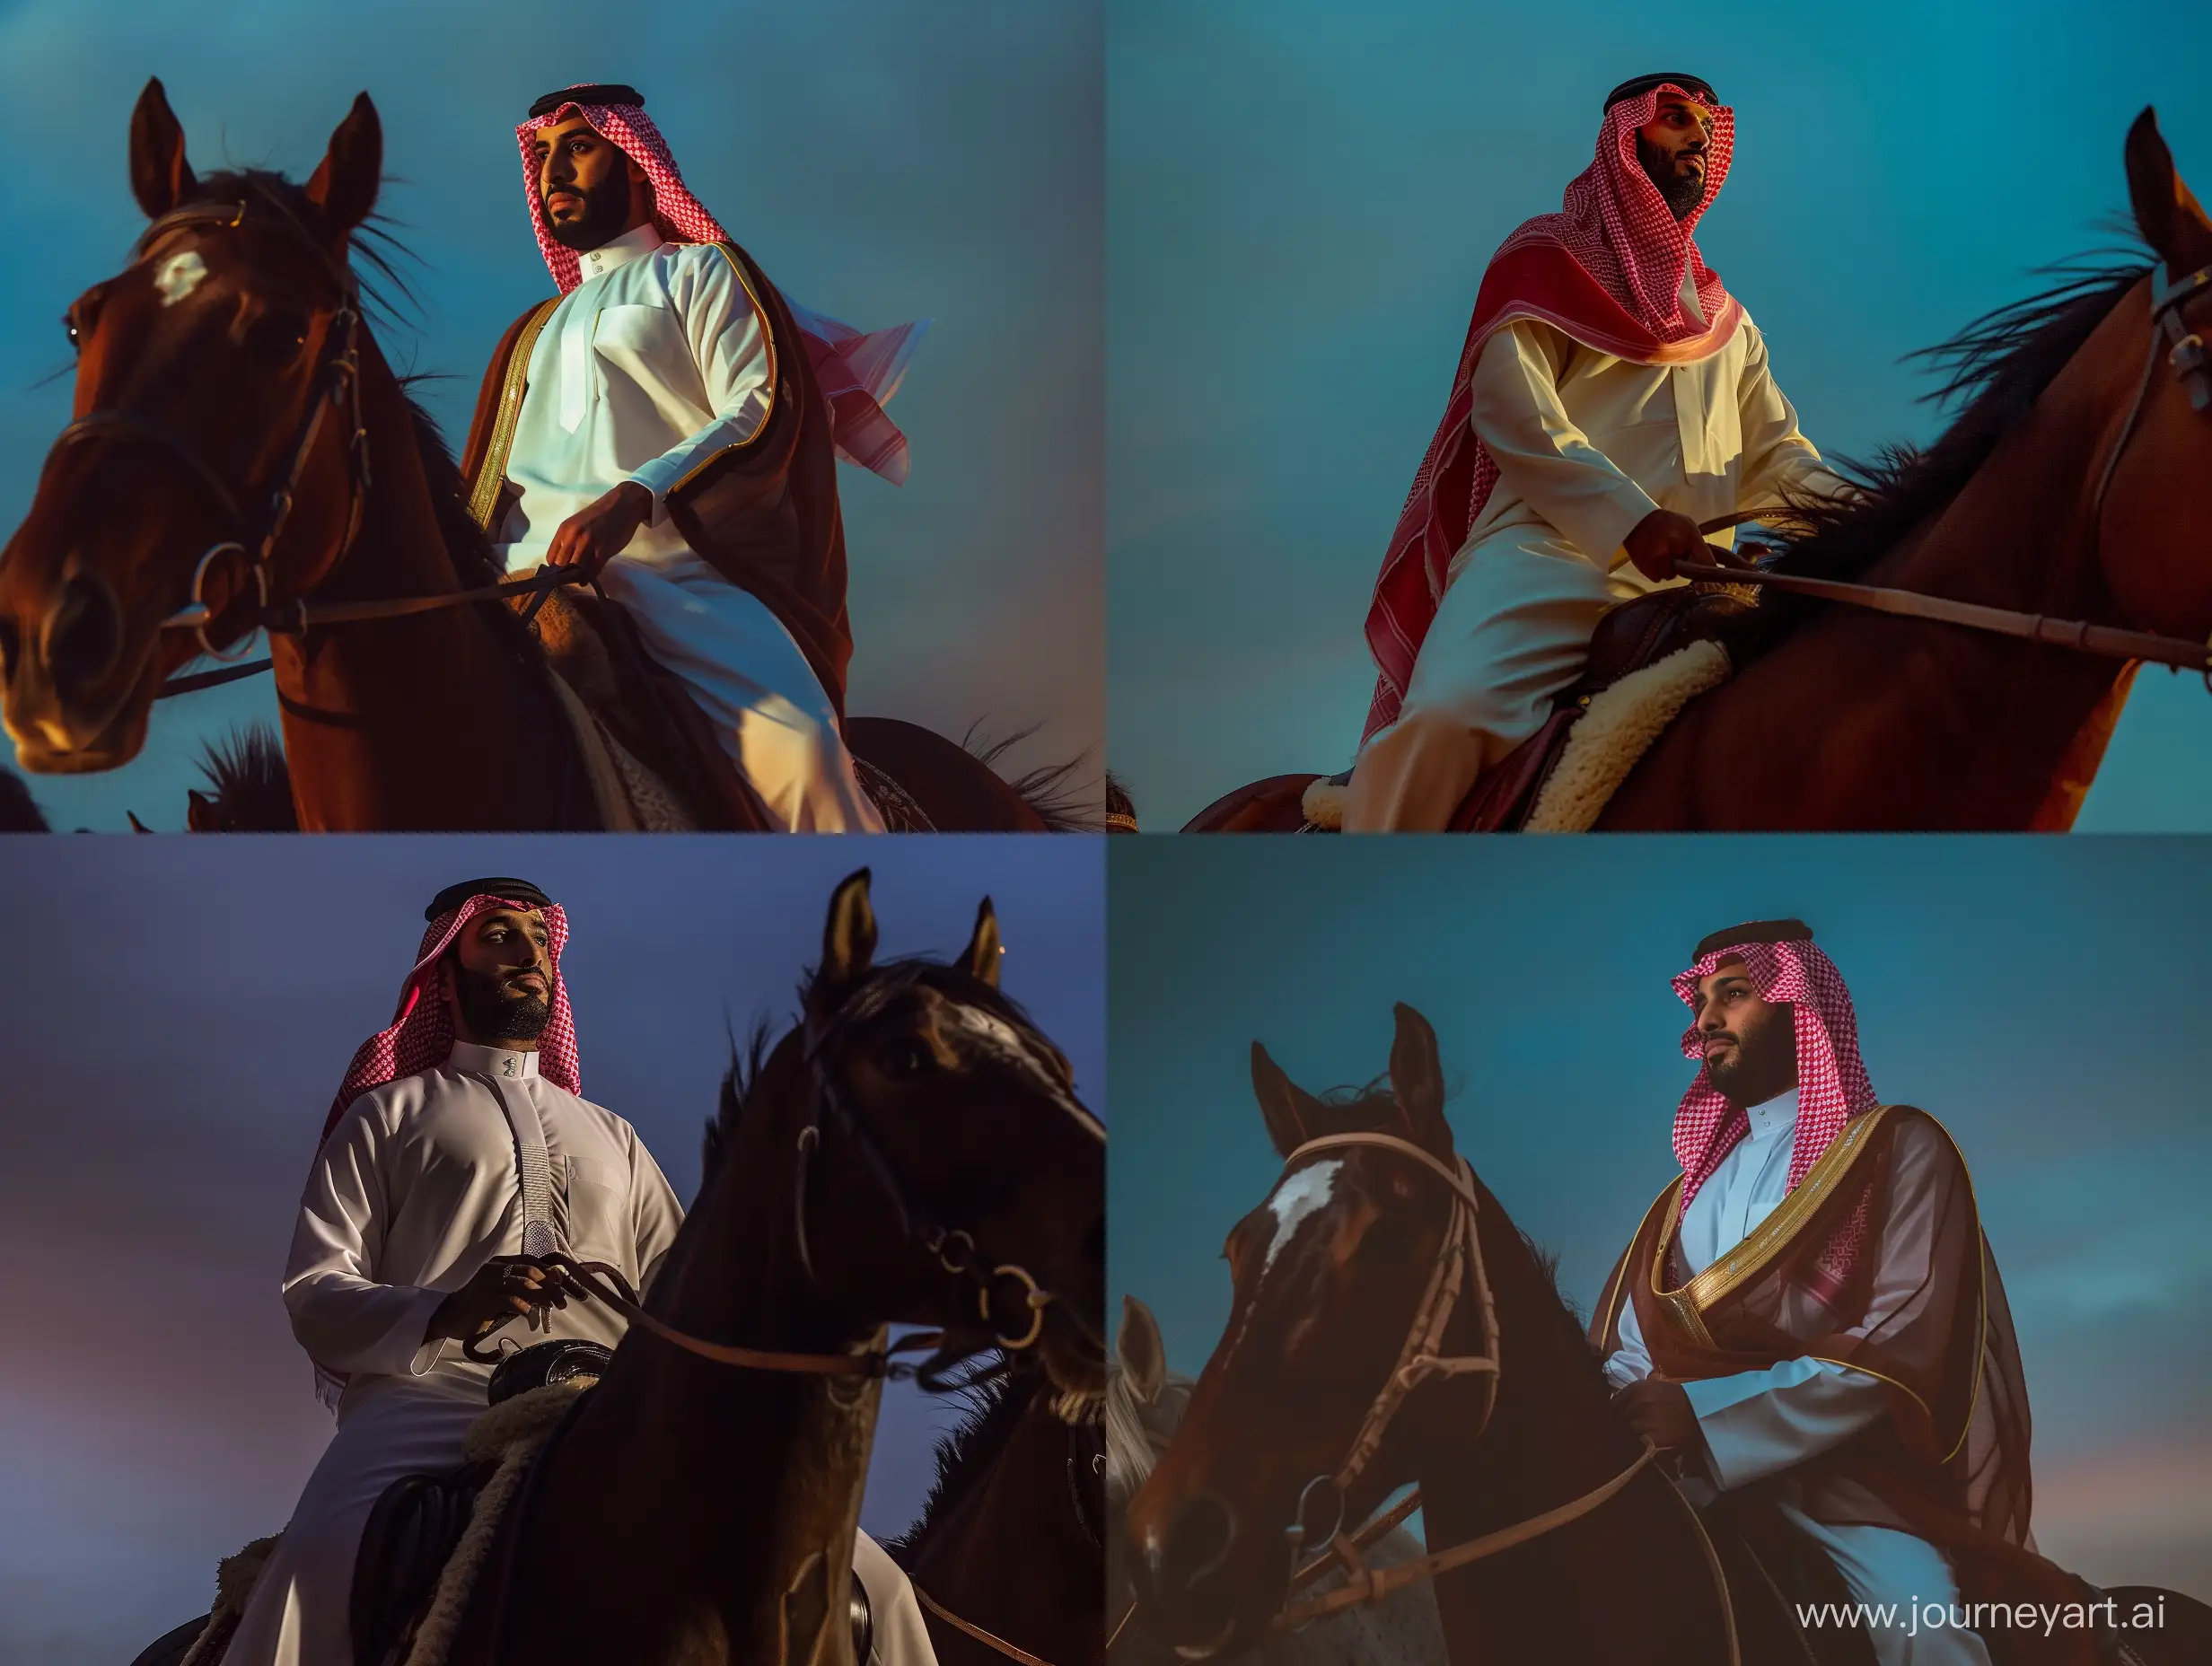 Confident-Saudi-Prince-Riding-Arabian-Horses-at-Night-in-Cinematic-Style